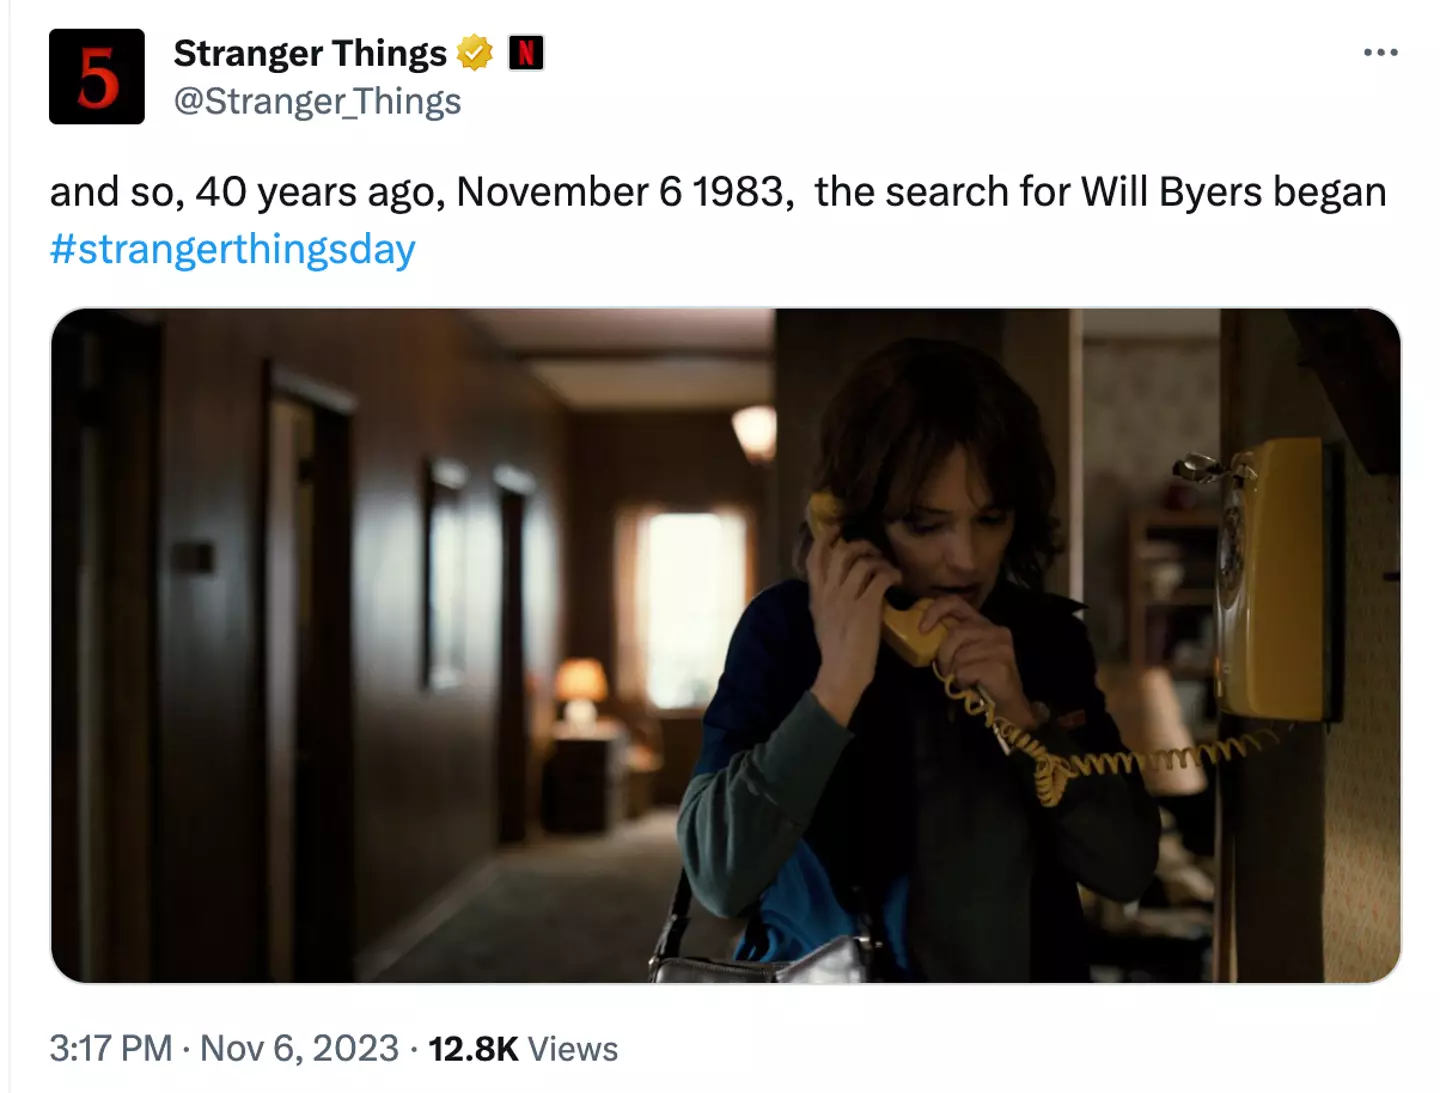 Will Byers went missing on 6 November, 1983.